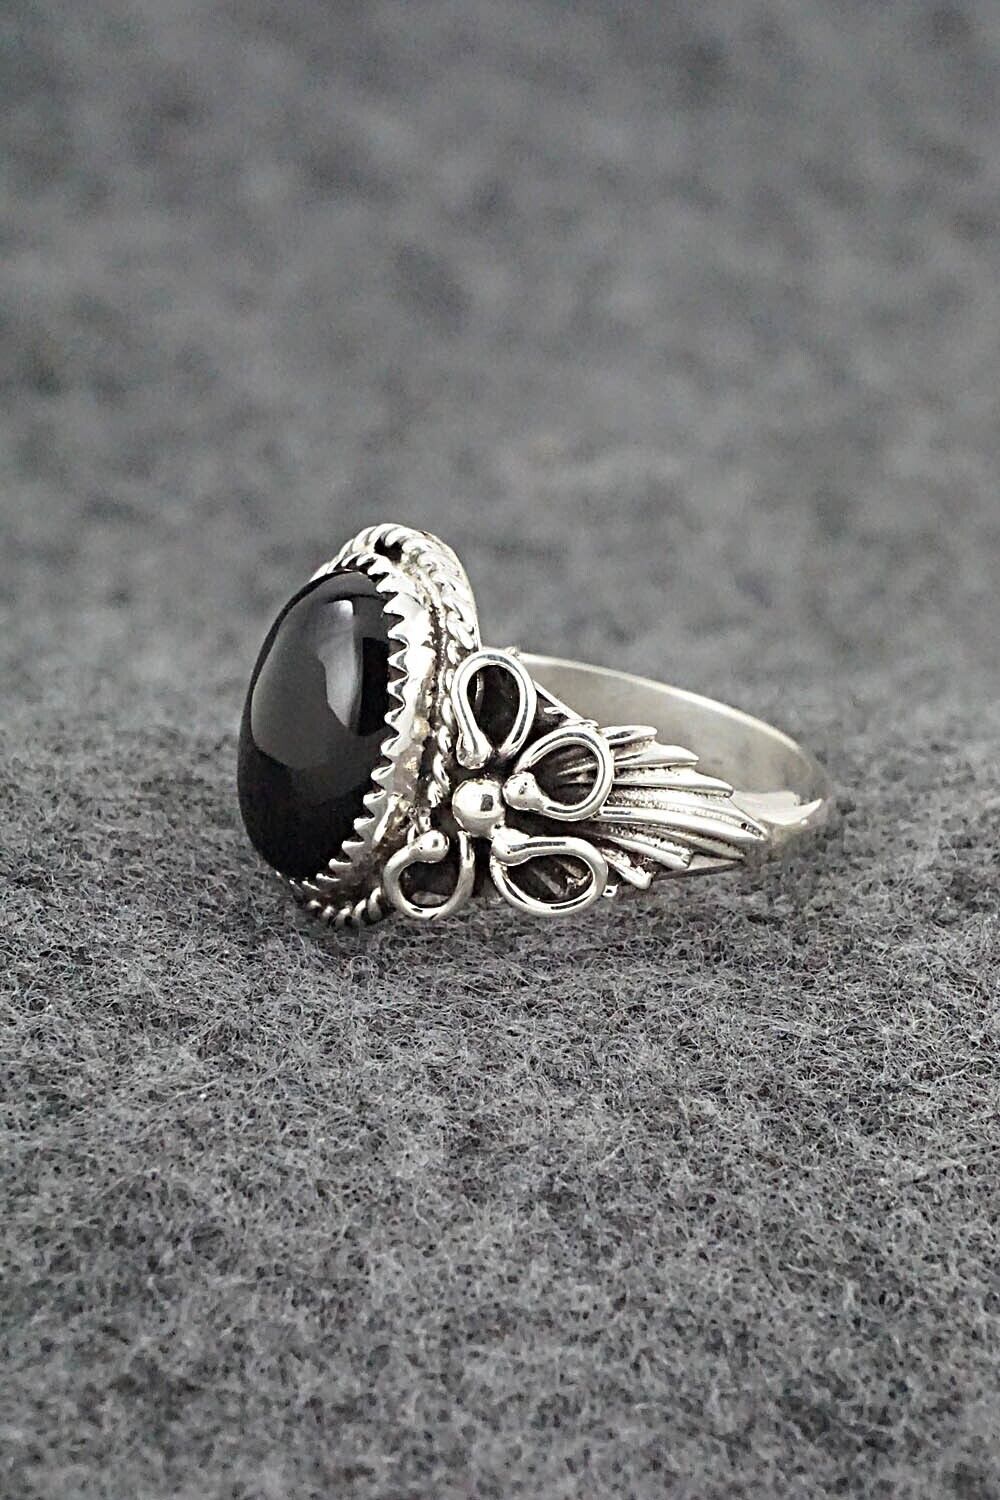 Onyx & Sterling Silver Ring - Jeannette Saunders - Size 9.75